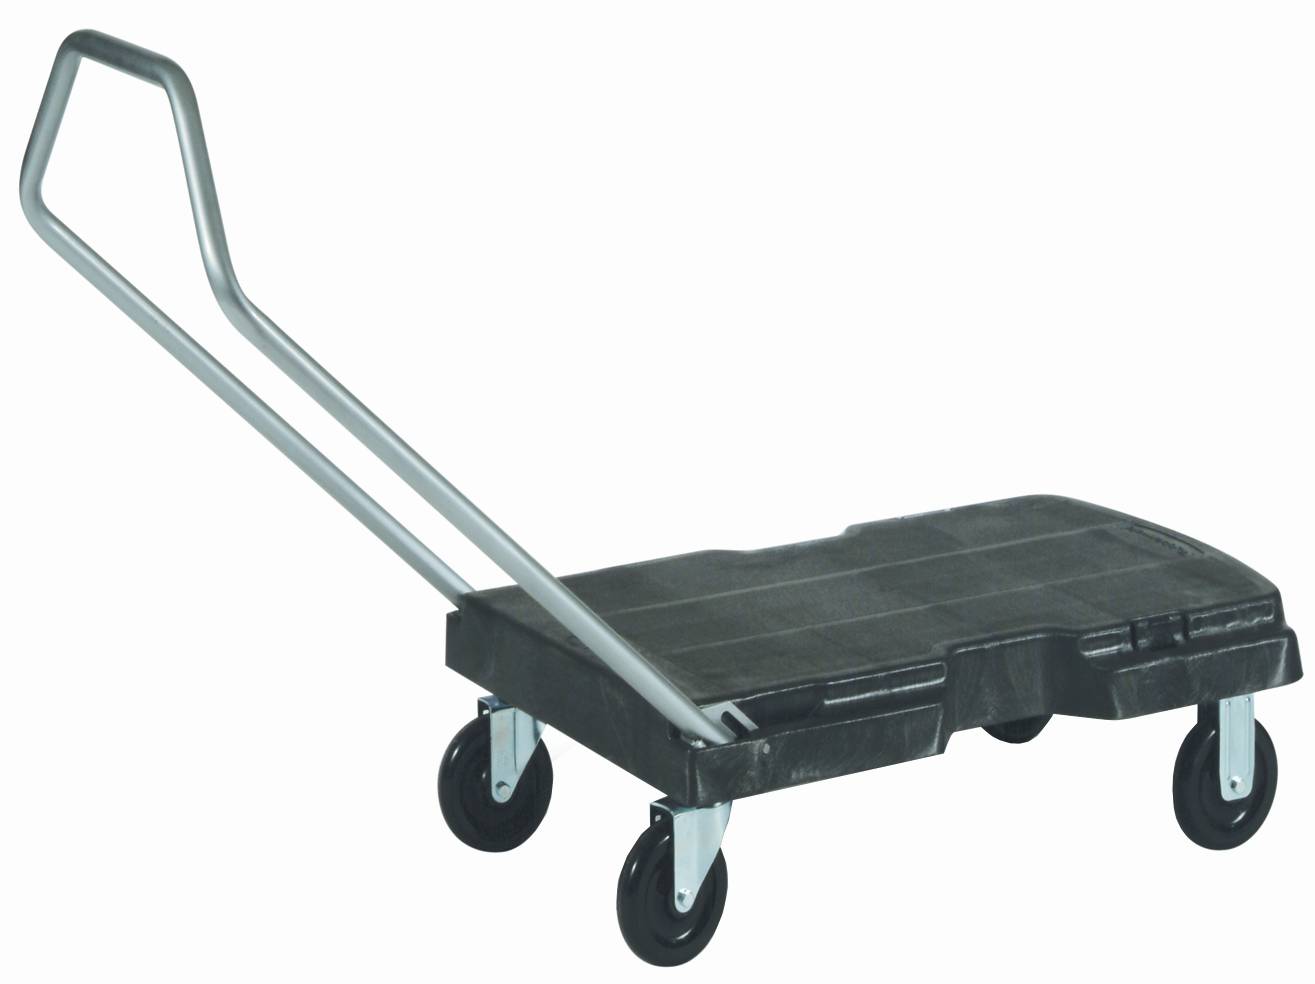 https://www.rubbermaidcommercialproducts.com/wp-images/product/detail/4401-Office-Cart.jpg